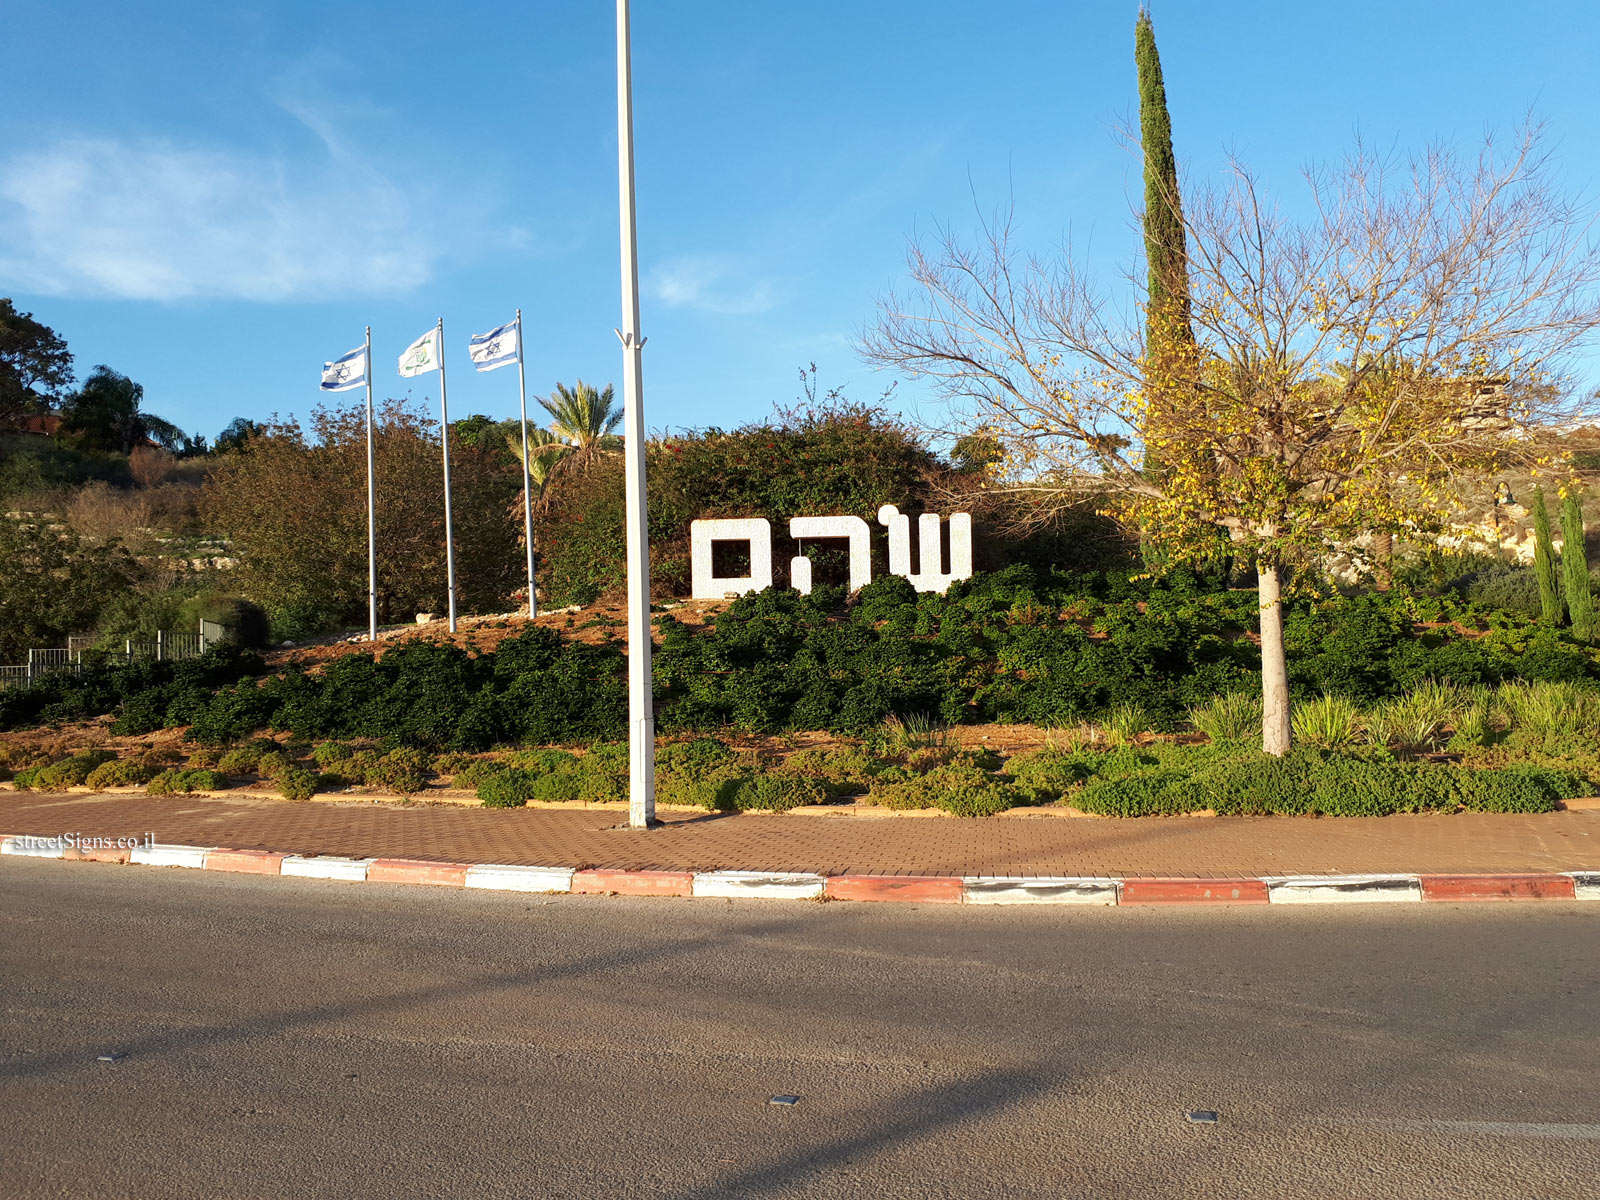 The entrance sign to the city of Shoham and its environs